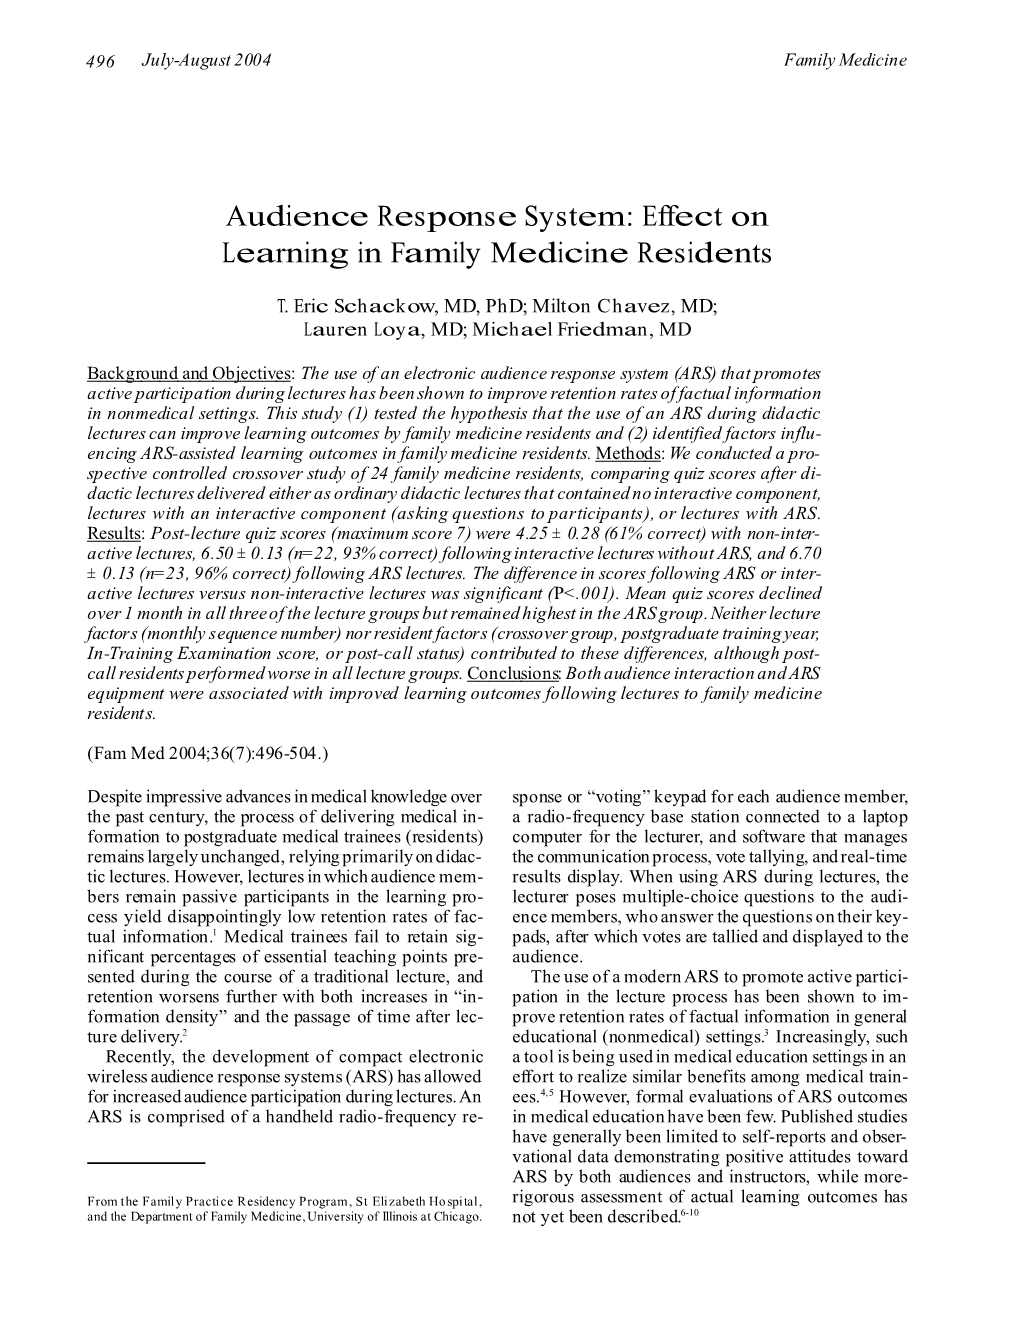 Audience Response System: Effect on Learning in Family Medicine Residents